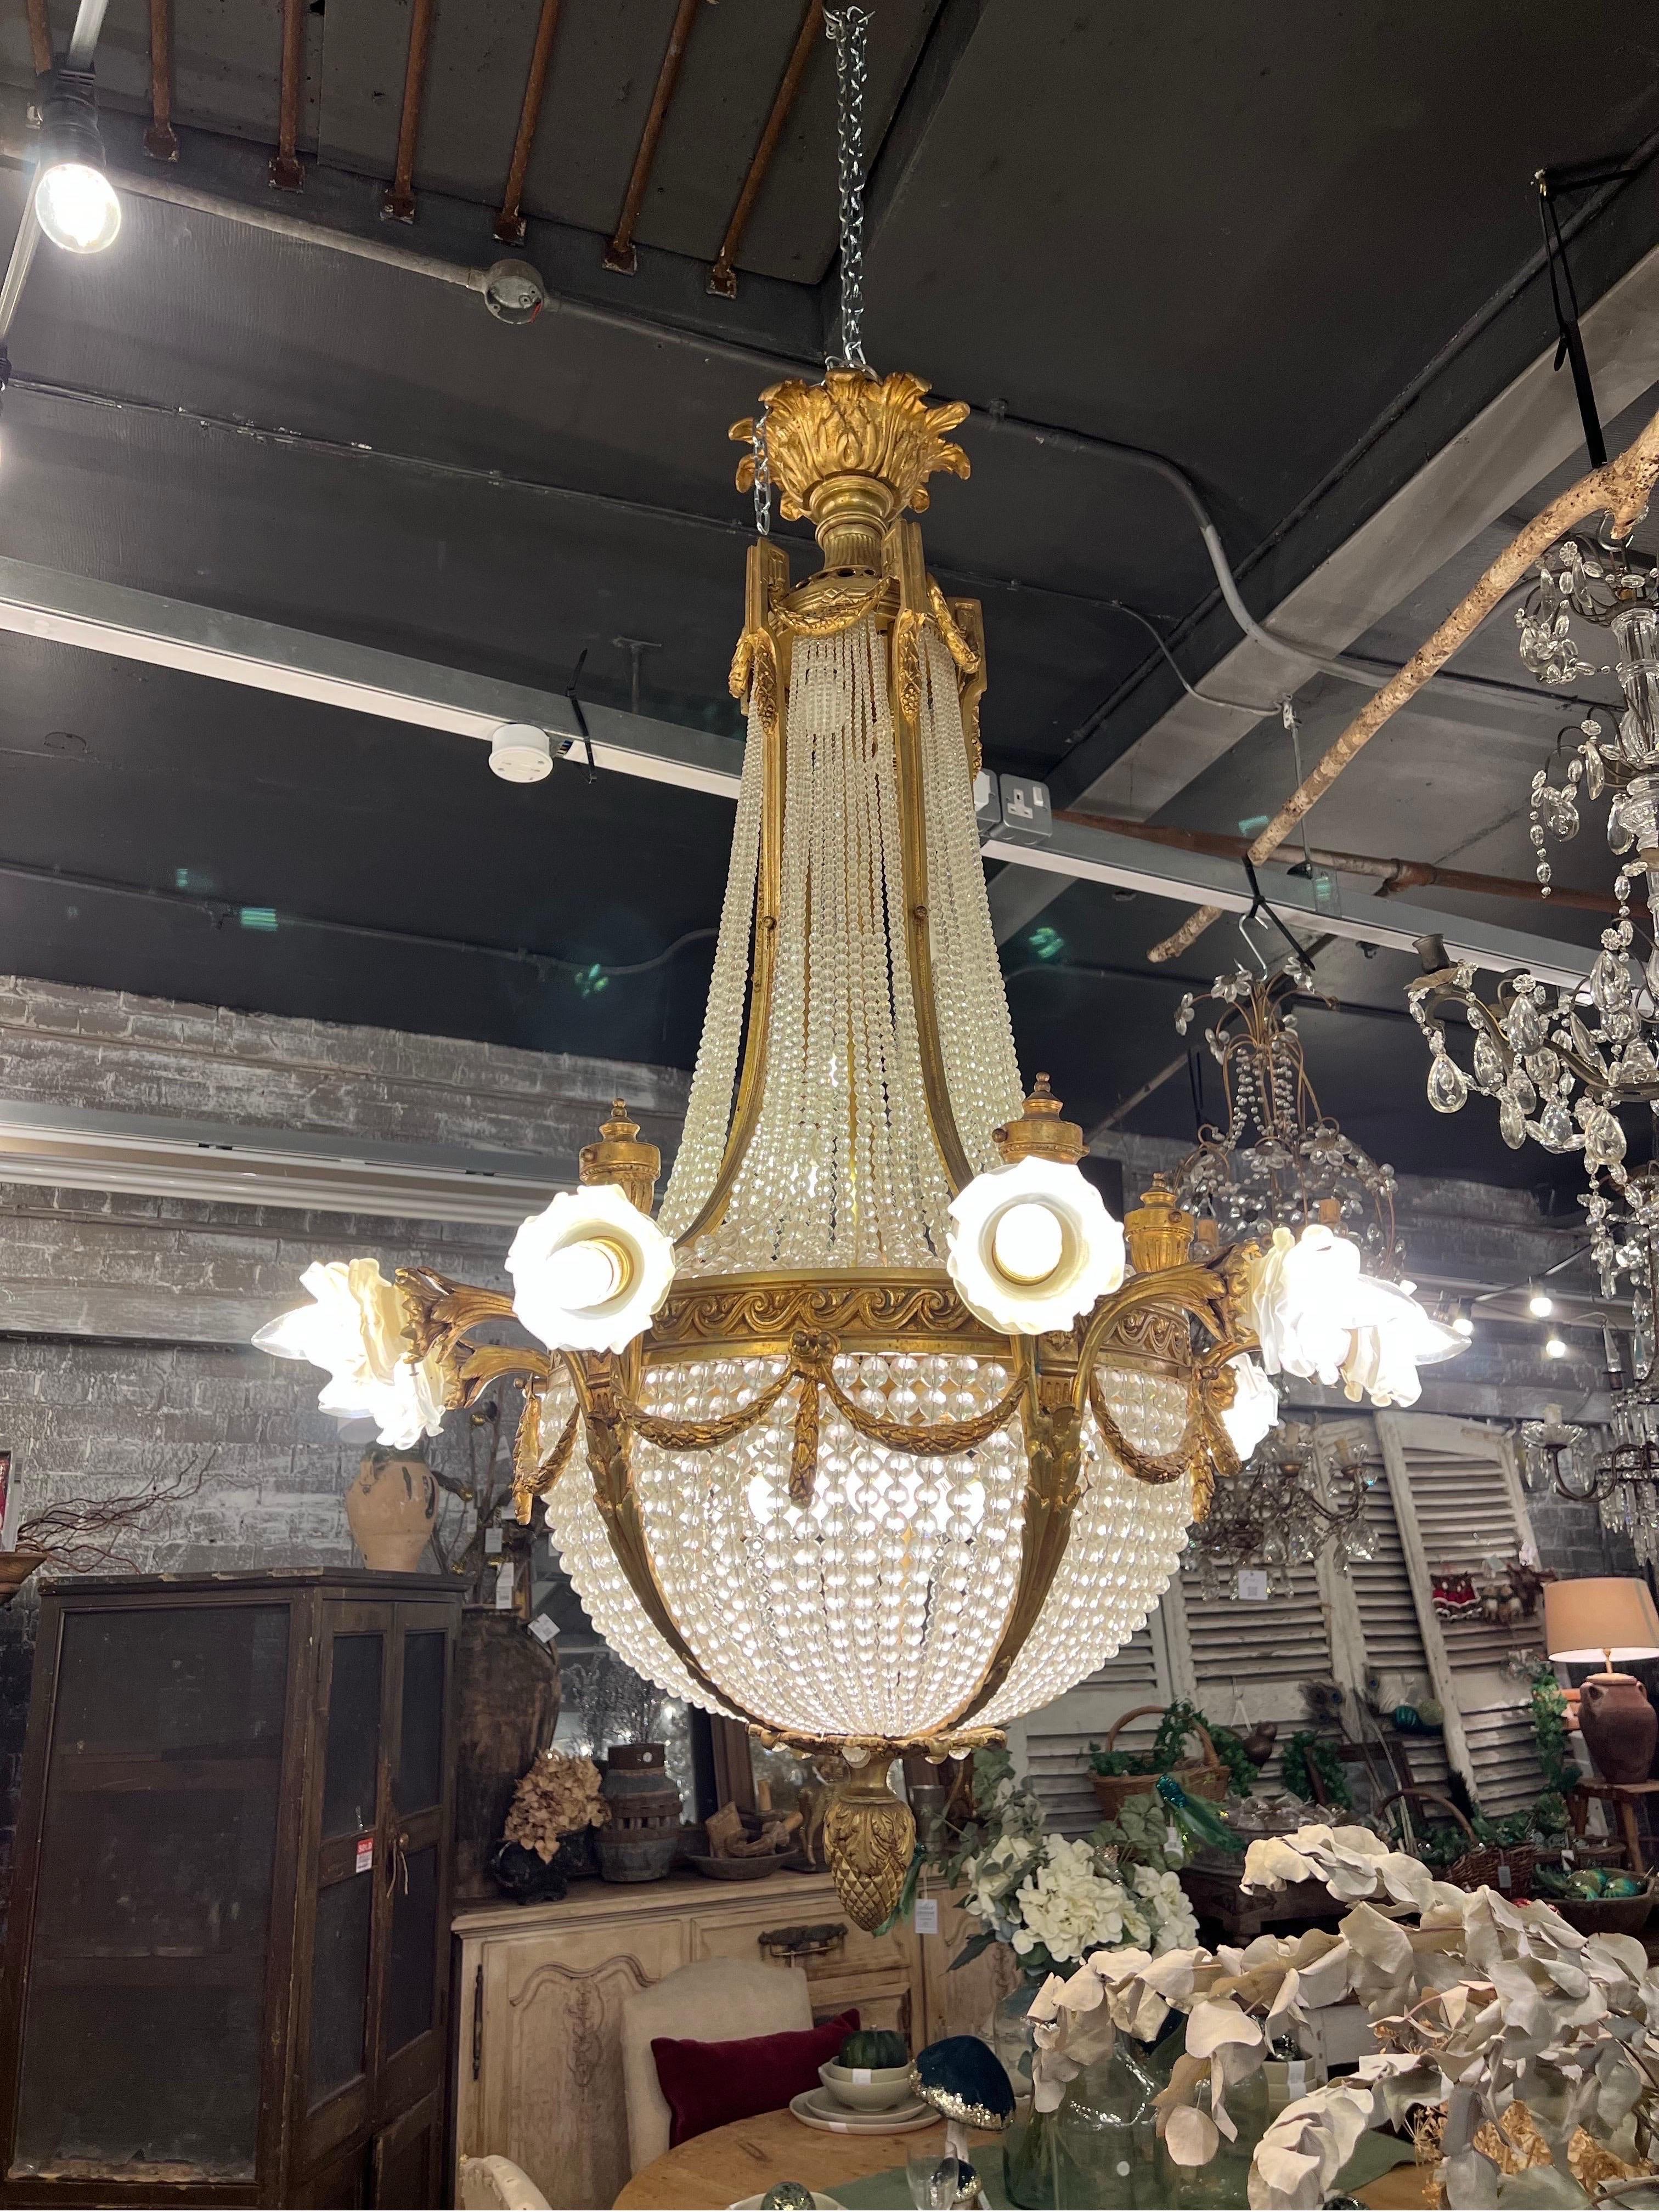 Transform your home into a palace with a stunning French Empire chandelier. This exquisite antique crystal chandelier is the epitome of elegance and luxury, adding a touch of sophistication to any room.

Crafted with intricate detailing and